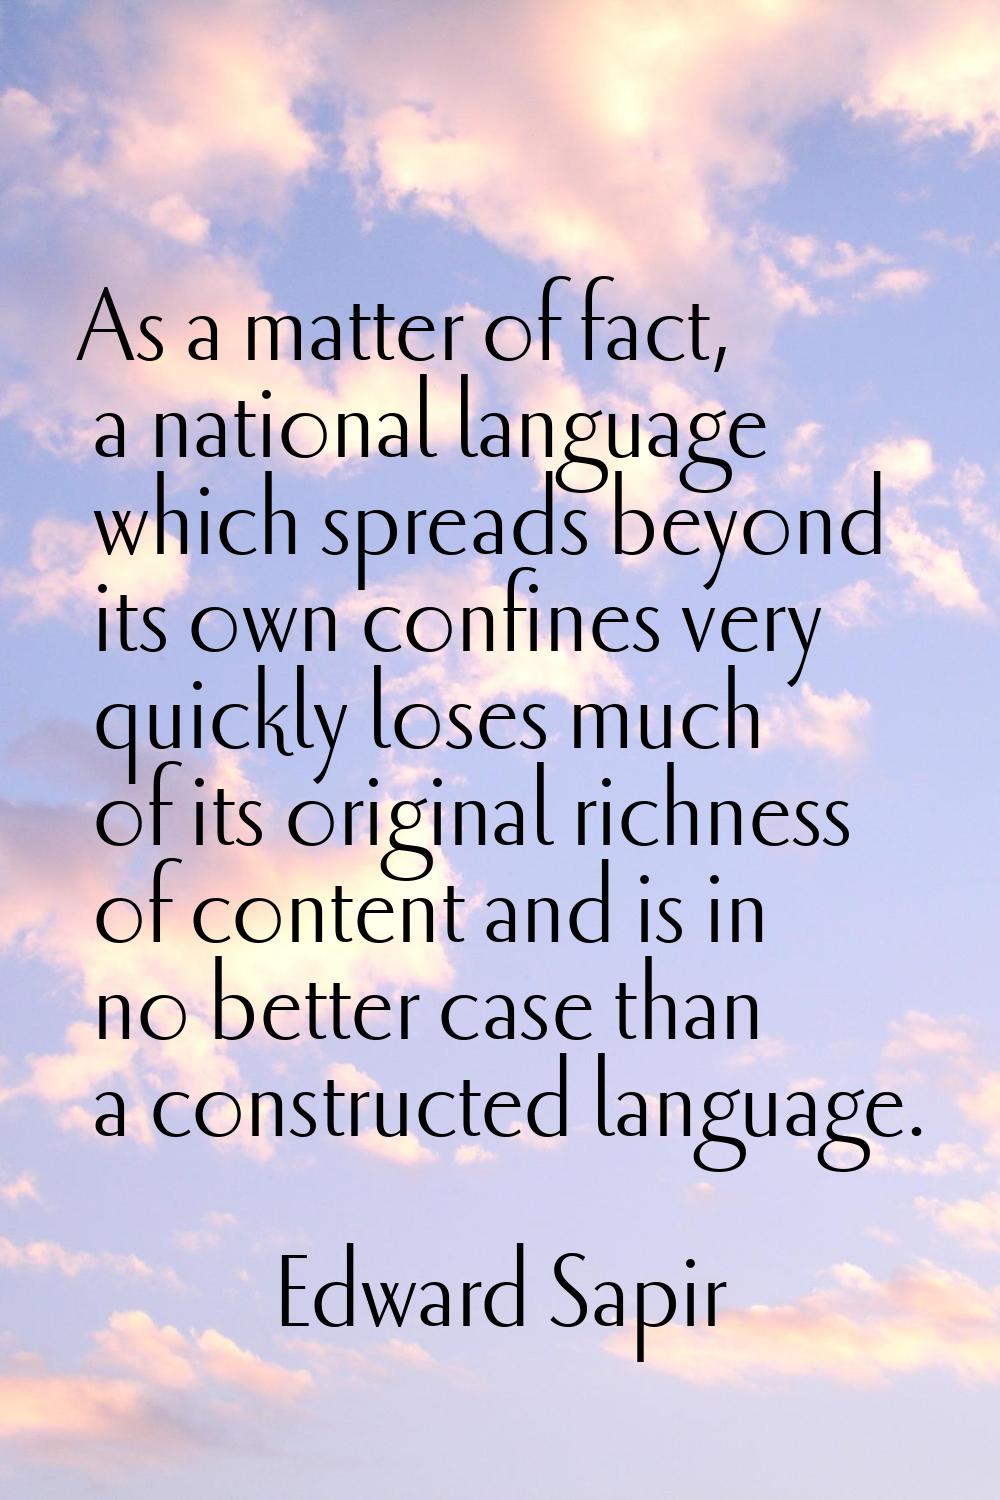 As a matter of fact, a national language which spreads beyond its own confines very quickly loses m